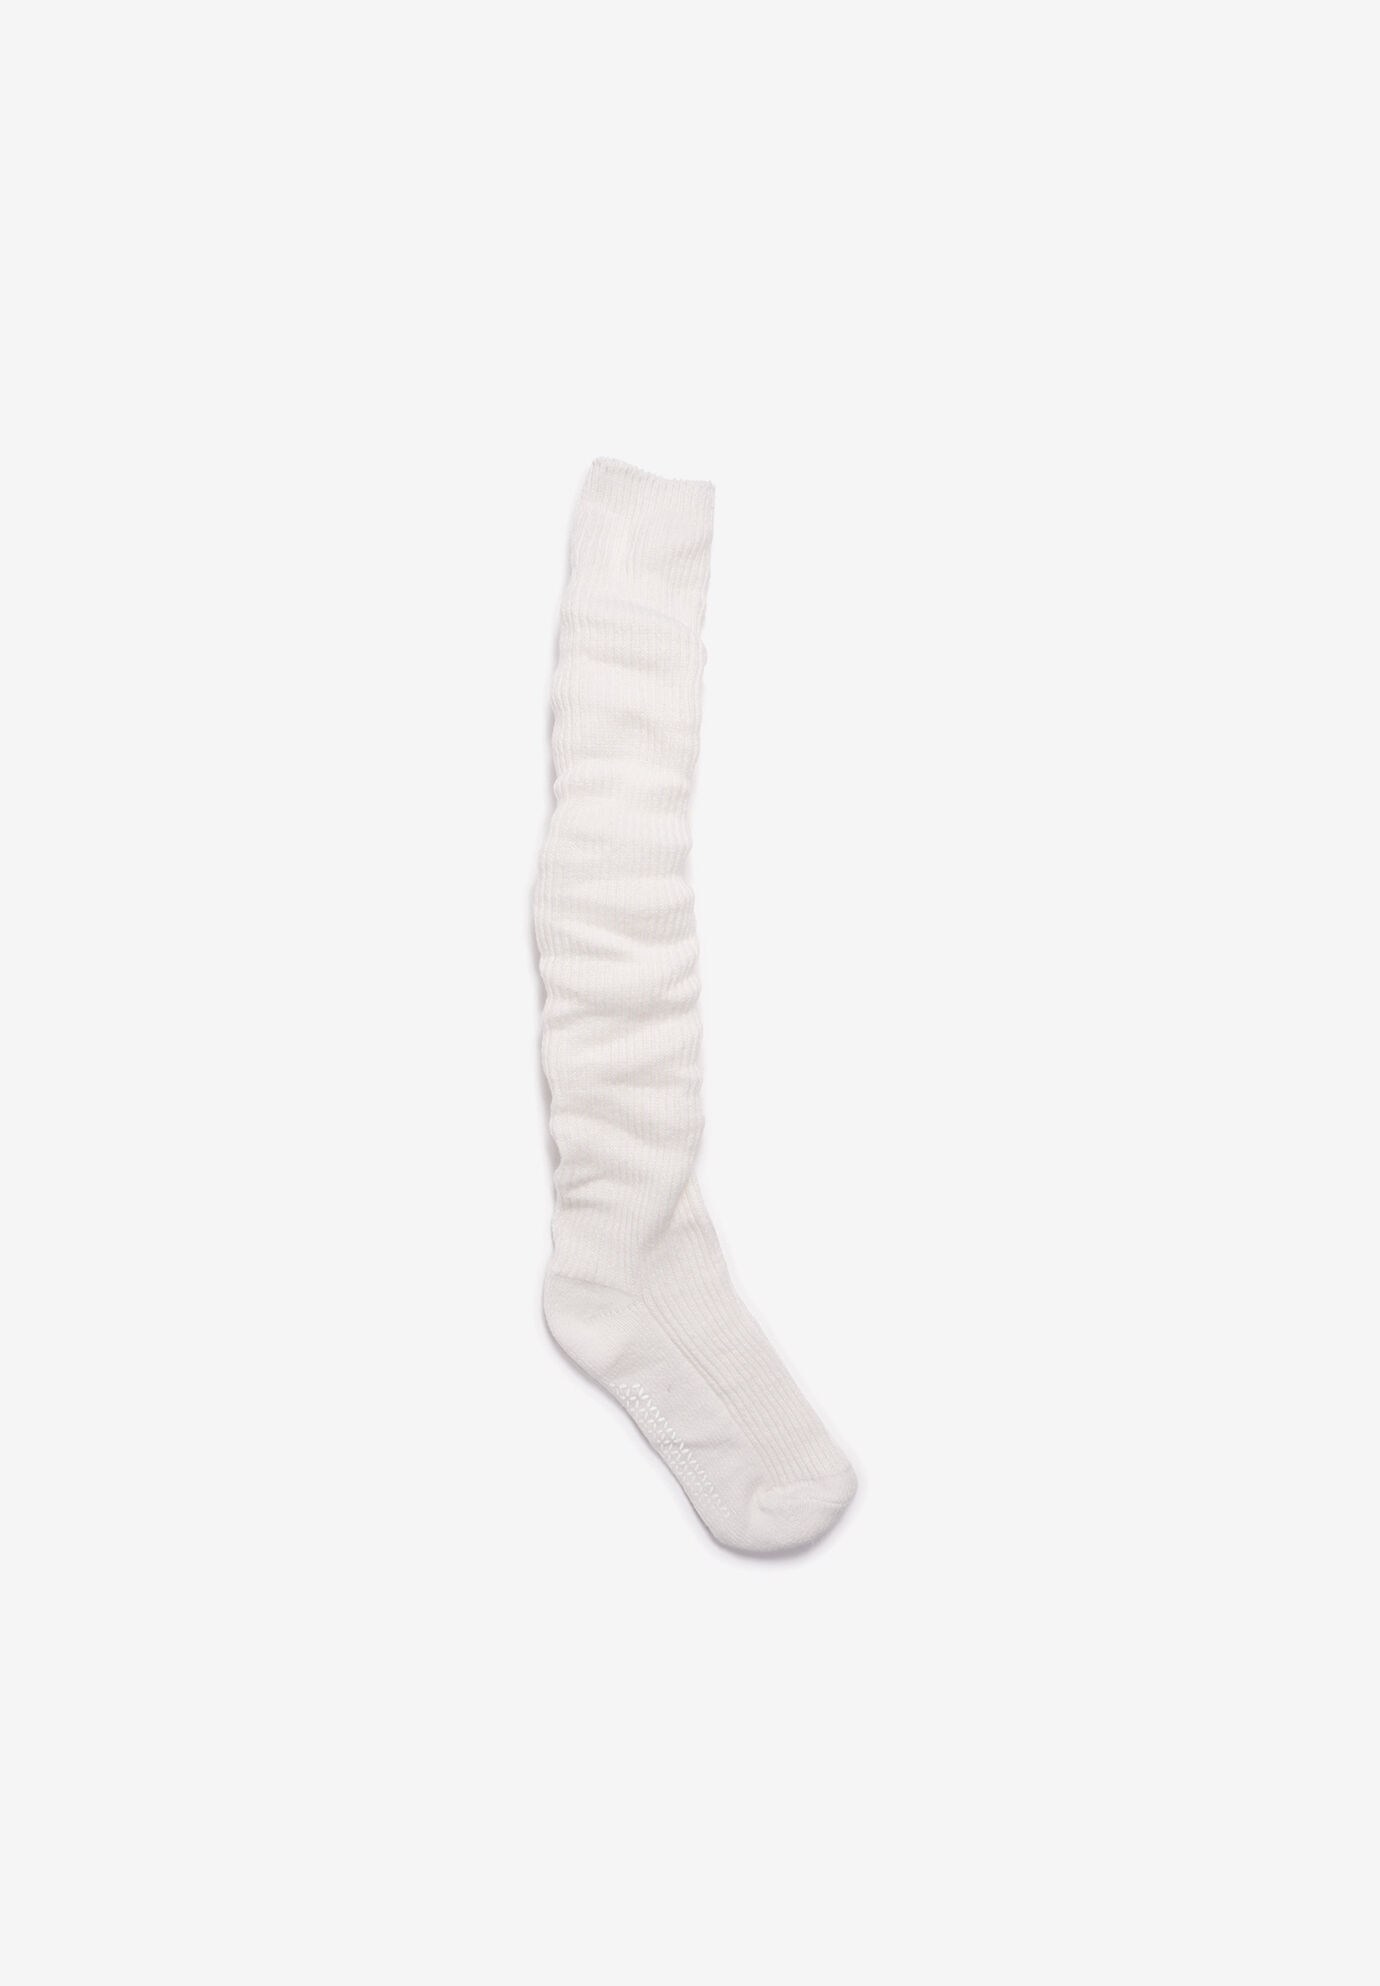 Women's Over The Knee Slouchy Socks by Kathy Ireland in Ivory (Size ONE)